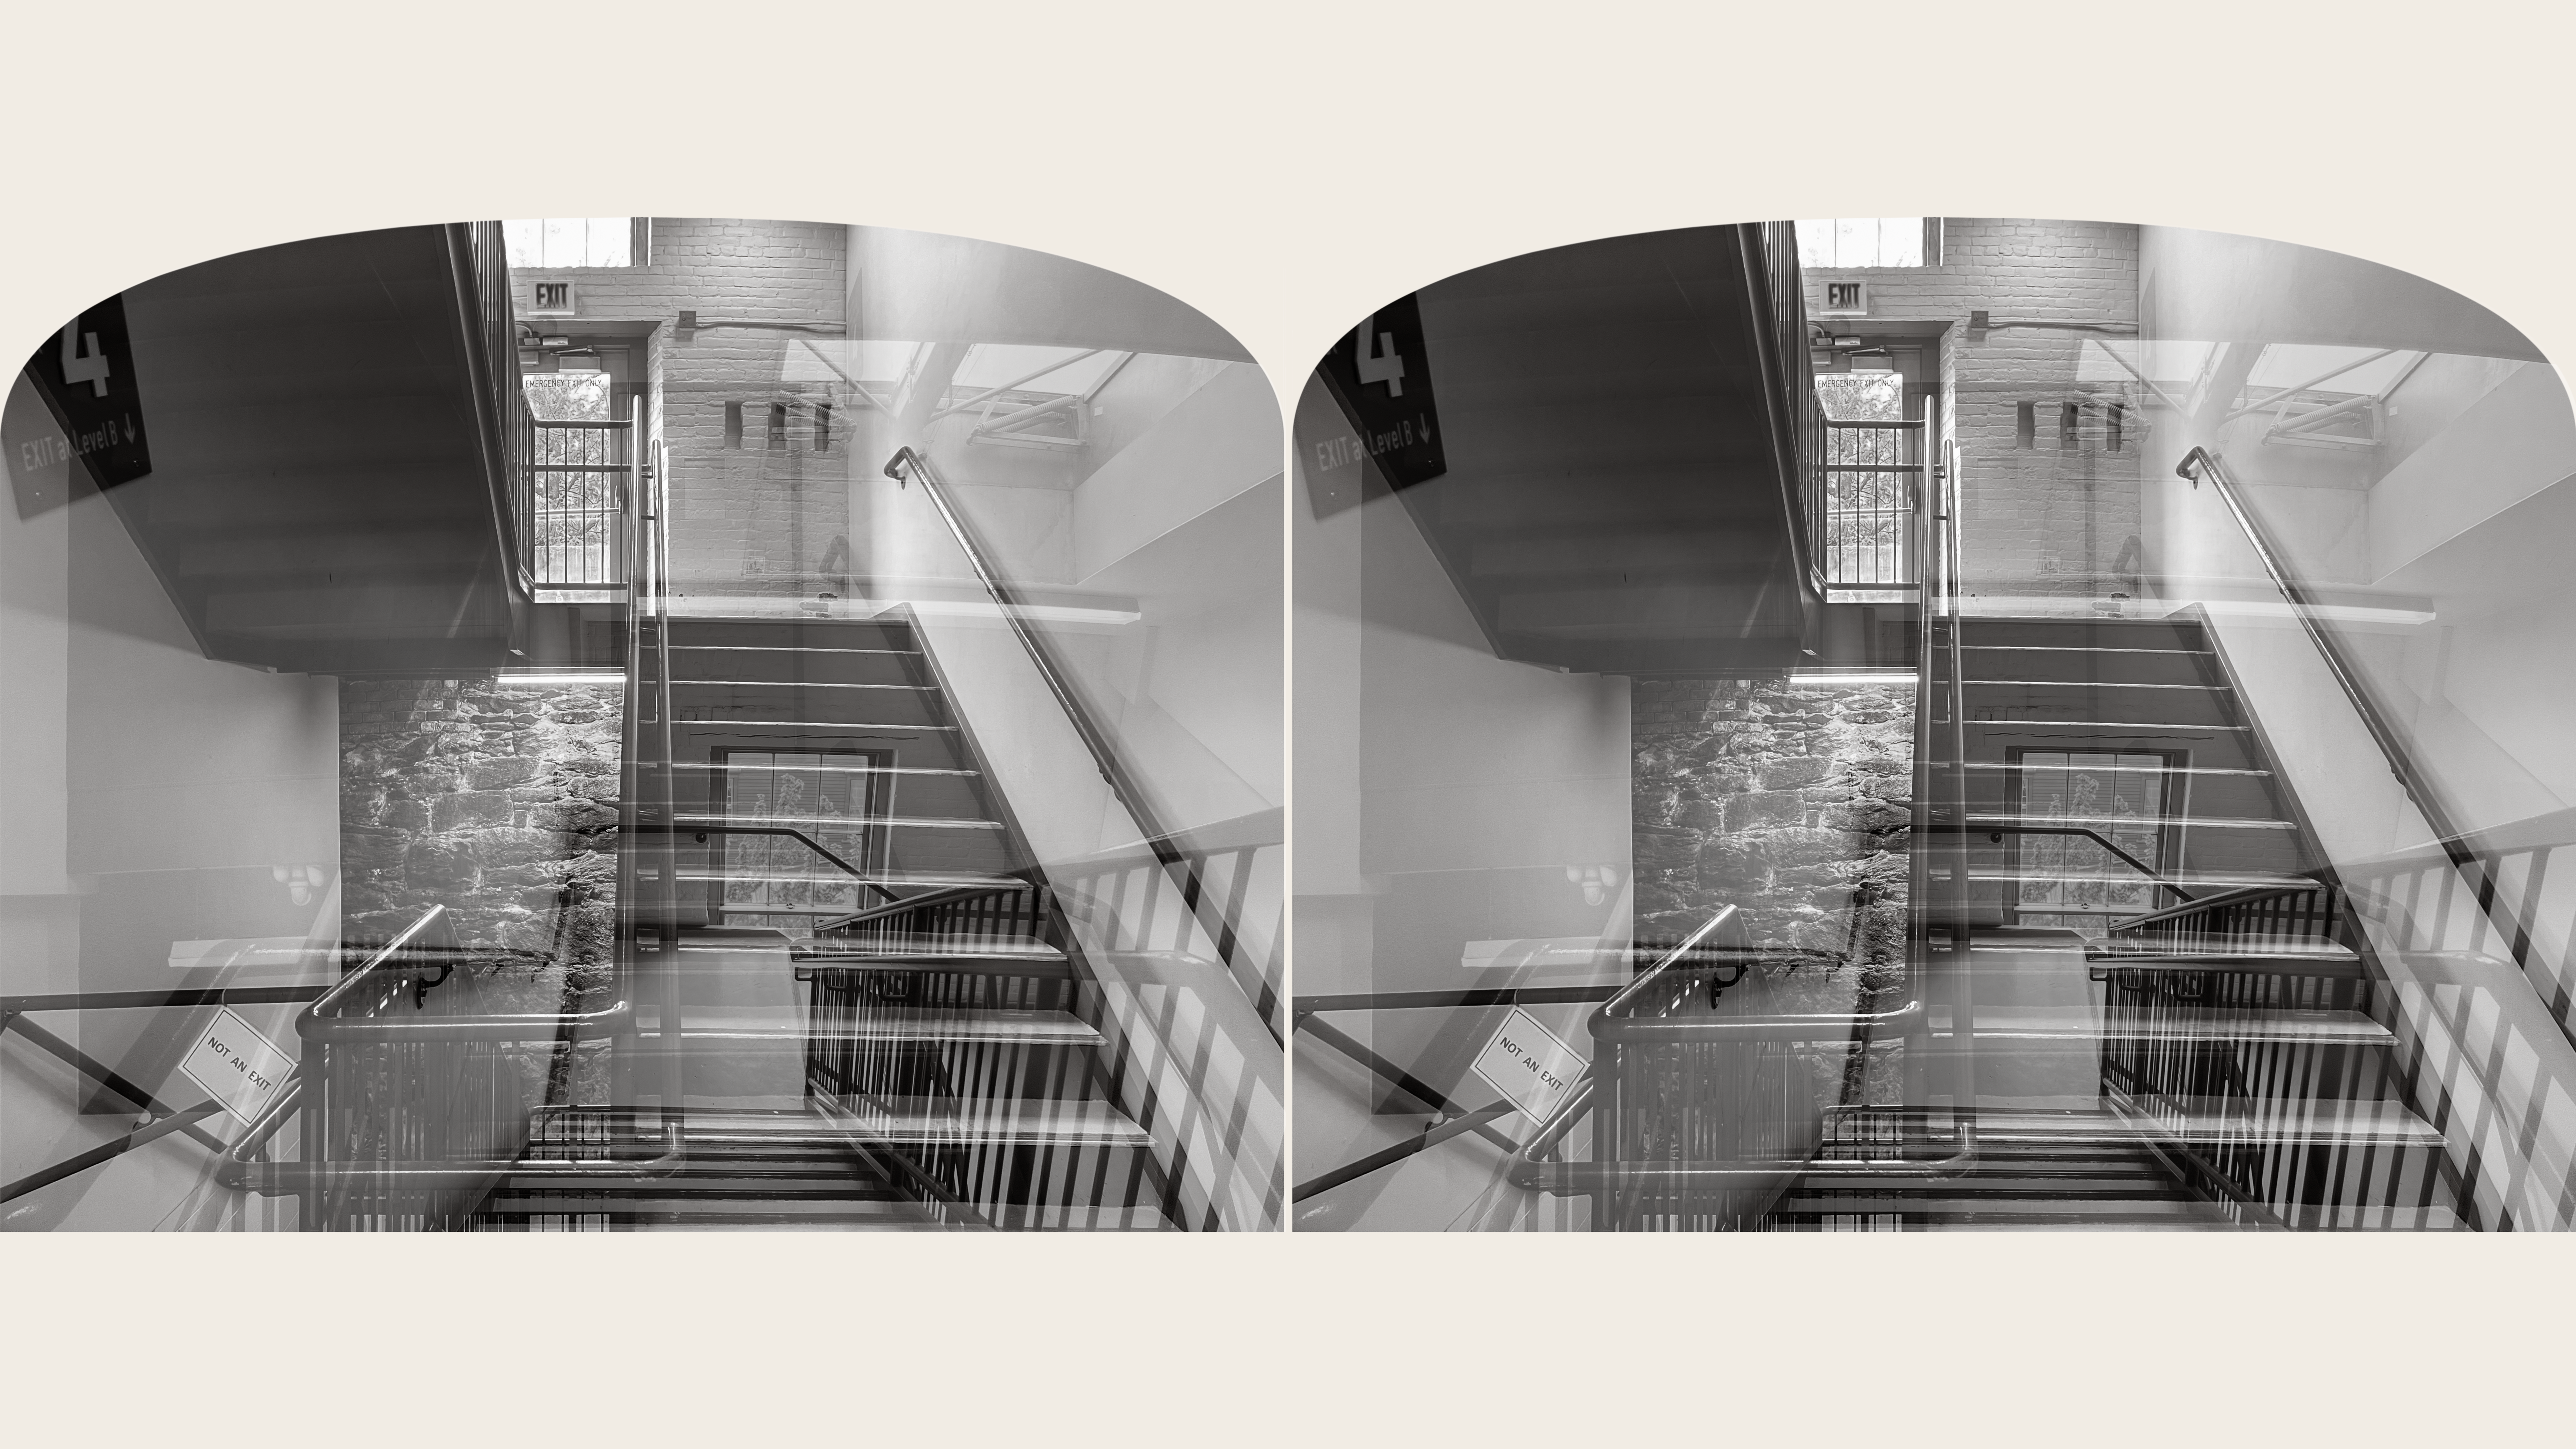 /The%20black-and-white%20stereoscopic%20image%20shows%20a%20symmetrical%2C%20multi-layered%20staircase.%20Mirrored%20perspectives%2C%20architectural%20details%20like%20brick%20walls%20and%20railings%2C%20and%20overlapping%20layers%20create%20a%20dynamic%20sense%20of%20movement%2C%20capturing%20the%20stair%27s%20experience.